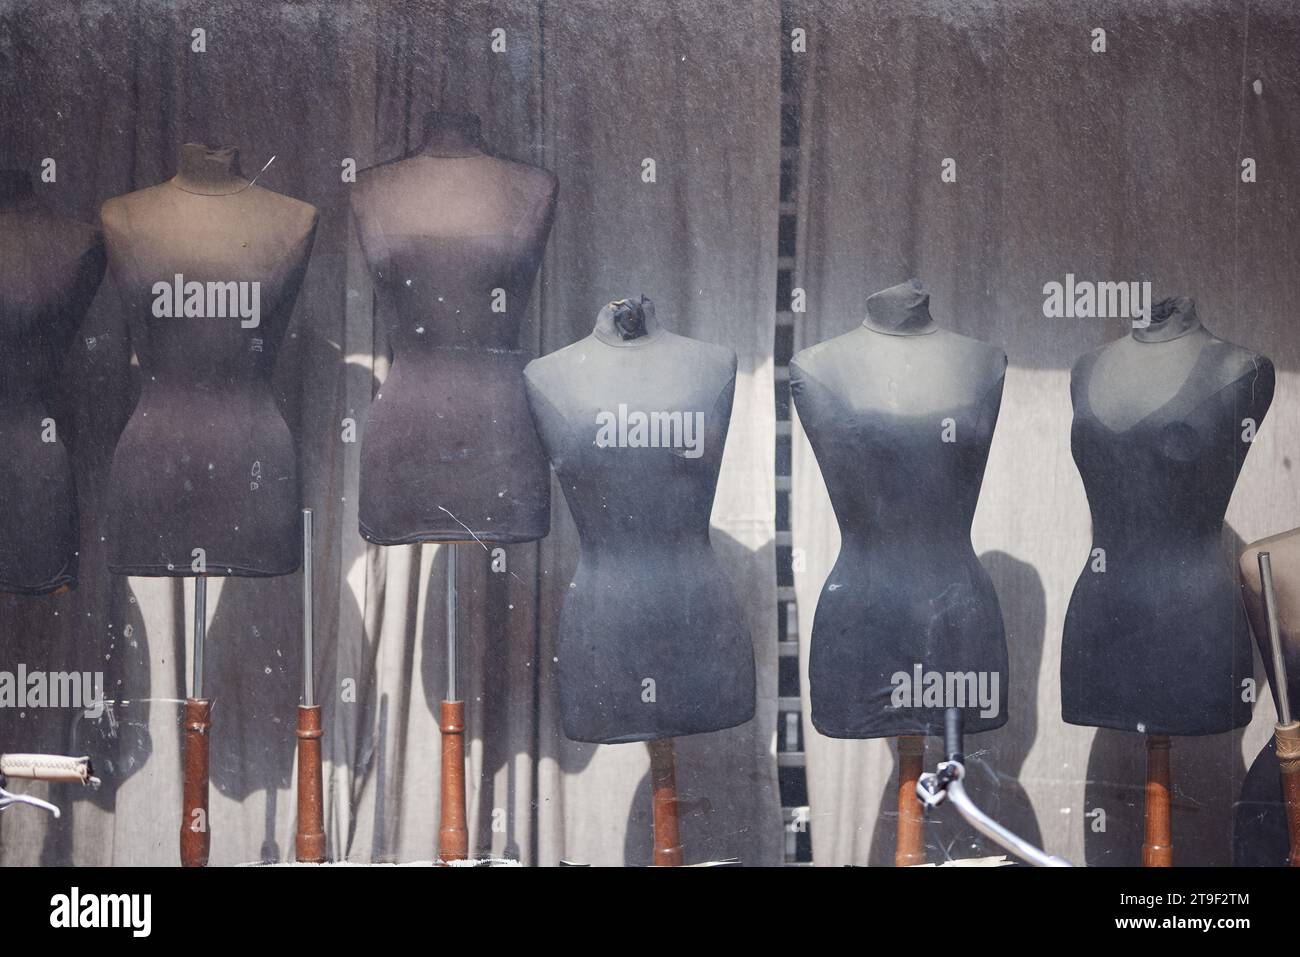 Clothing Mannequin Mannequins, Decorative Display Racks for Shop Windows,  Tailoring Busts and Dummy